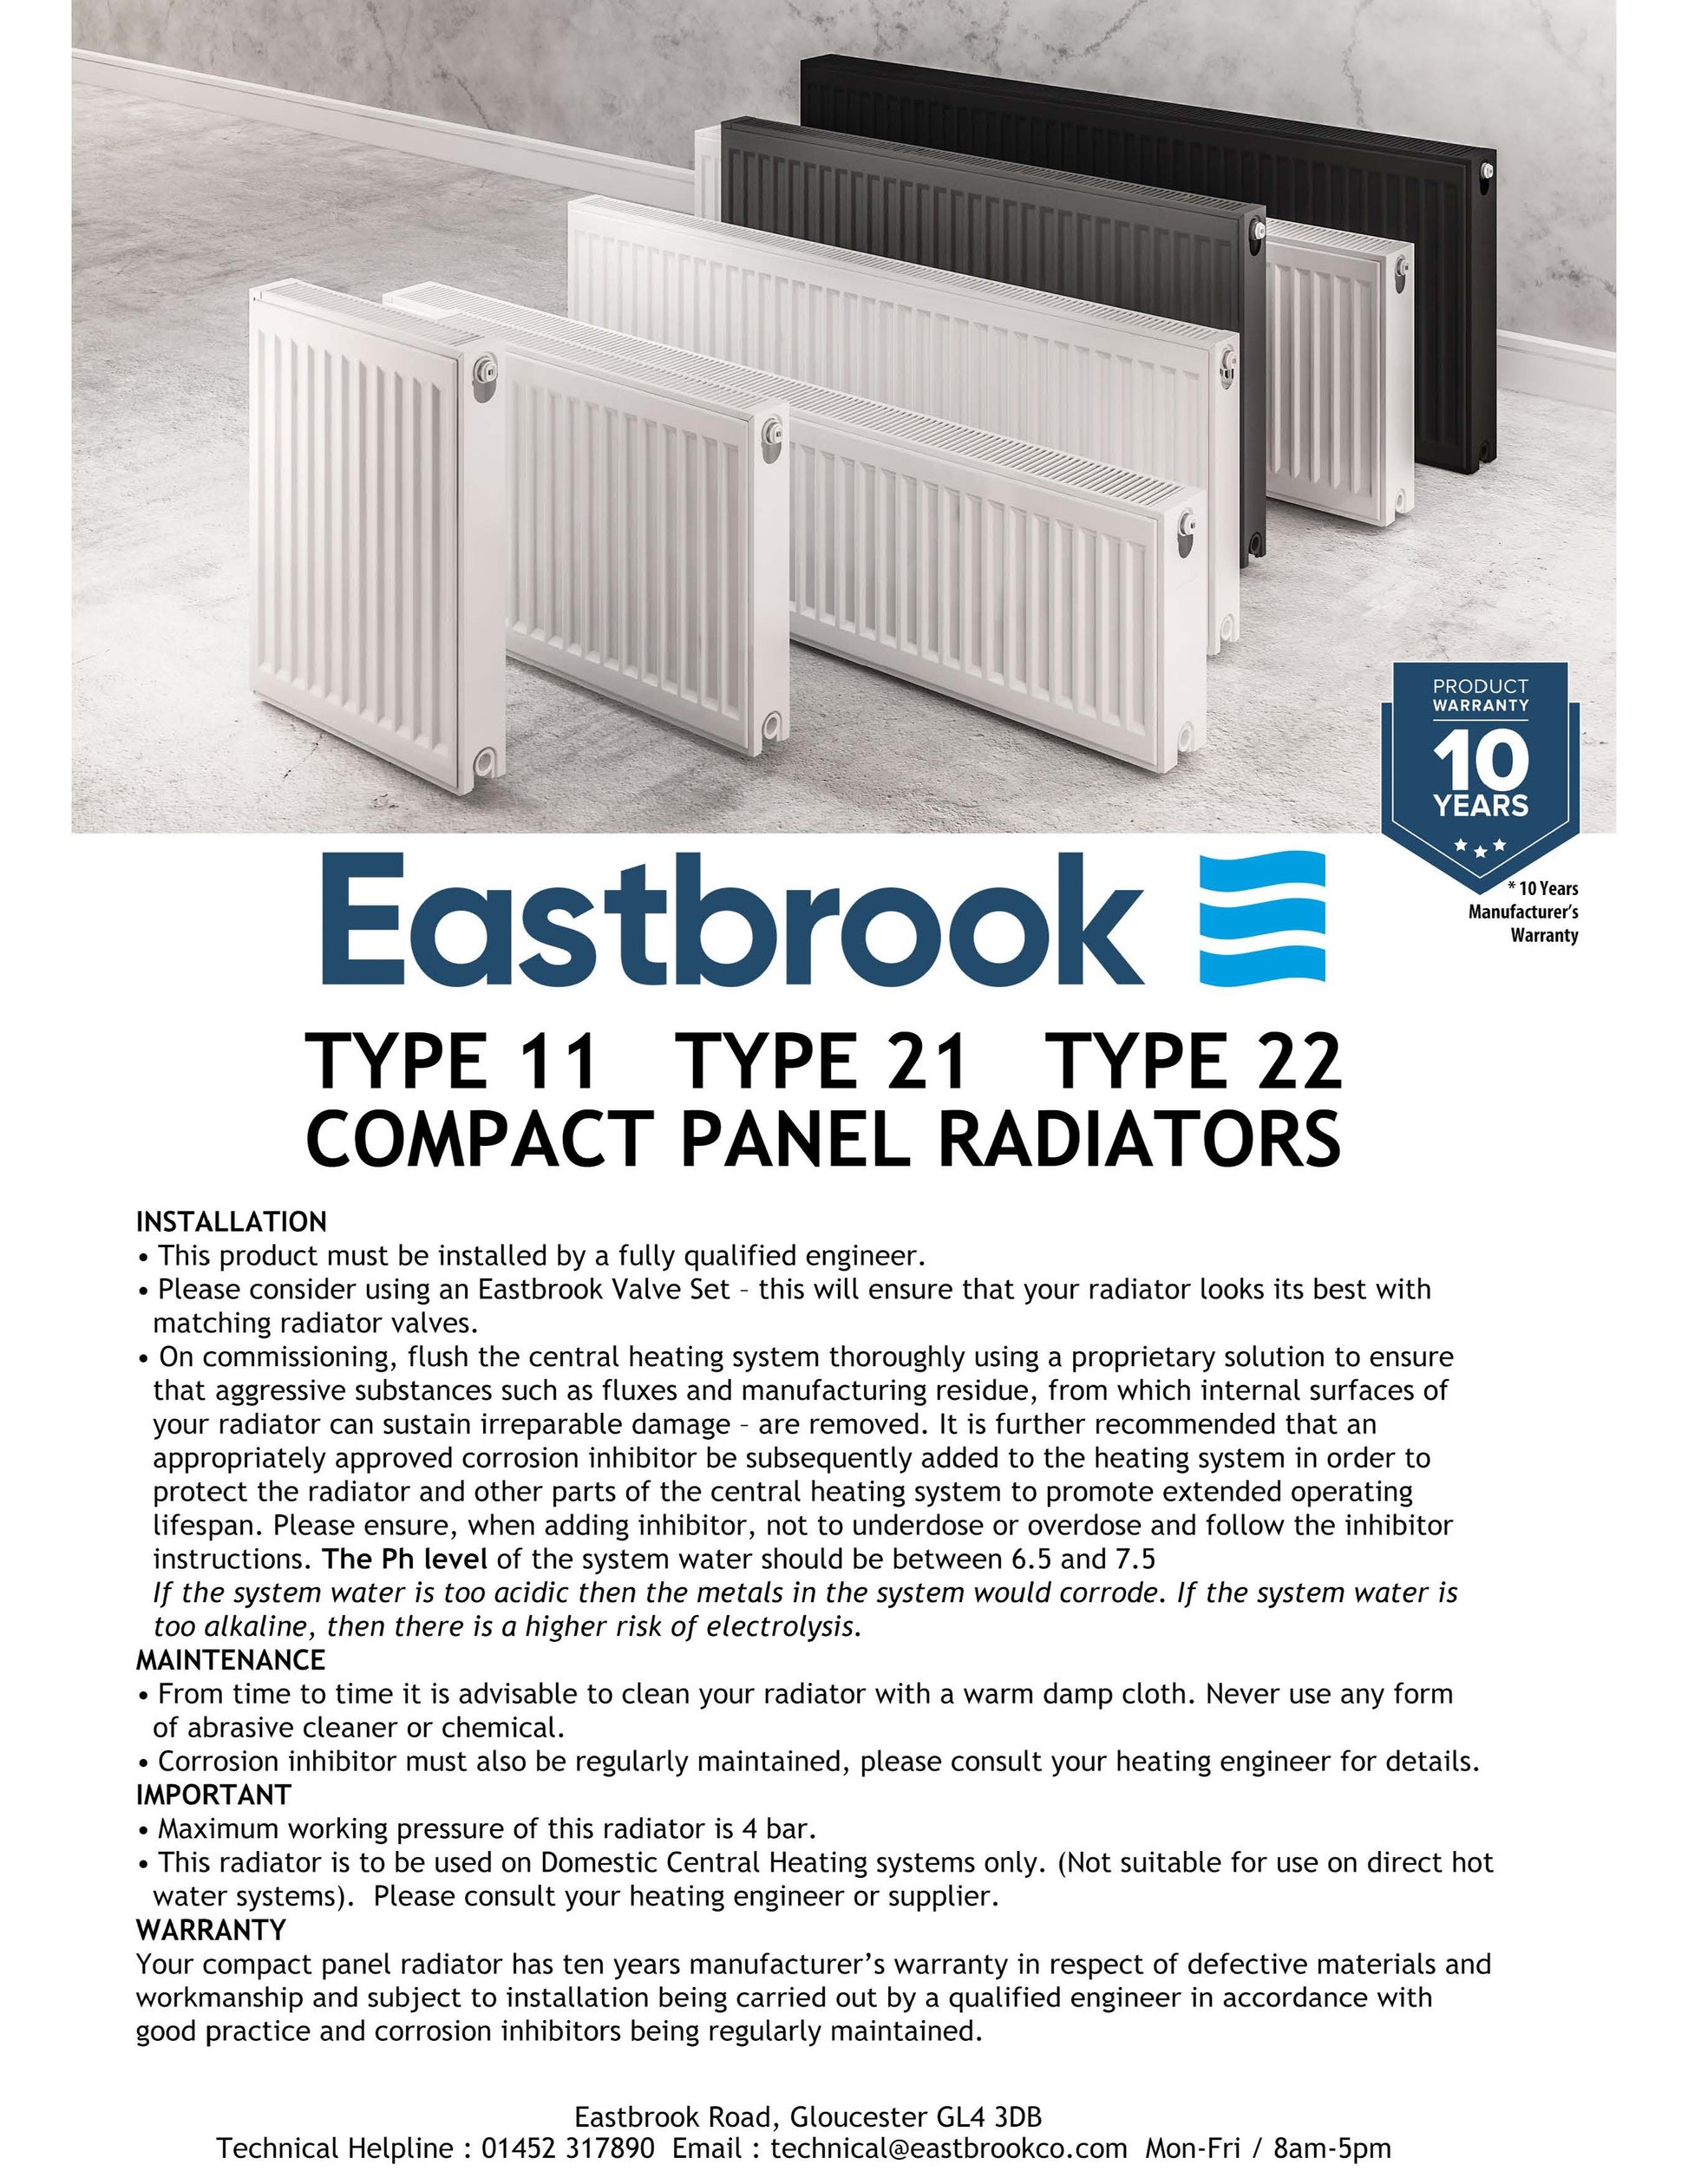 Eastbrook Type 22 Double Panel Gloss White Radiator 300mm High x 800mm Wide Technical Image 1 25.0137